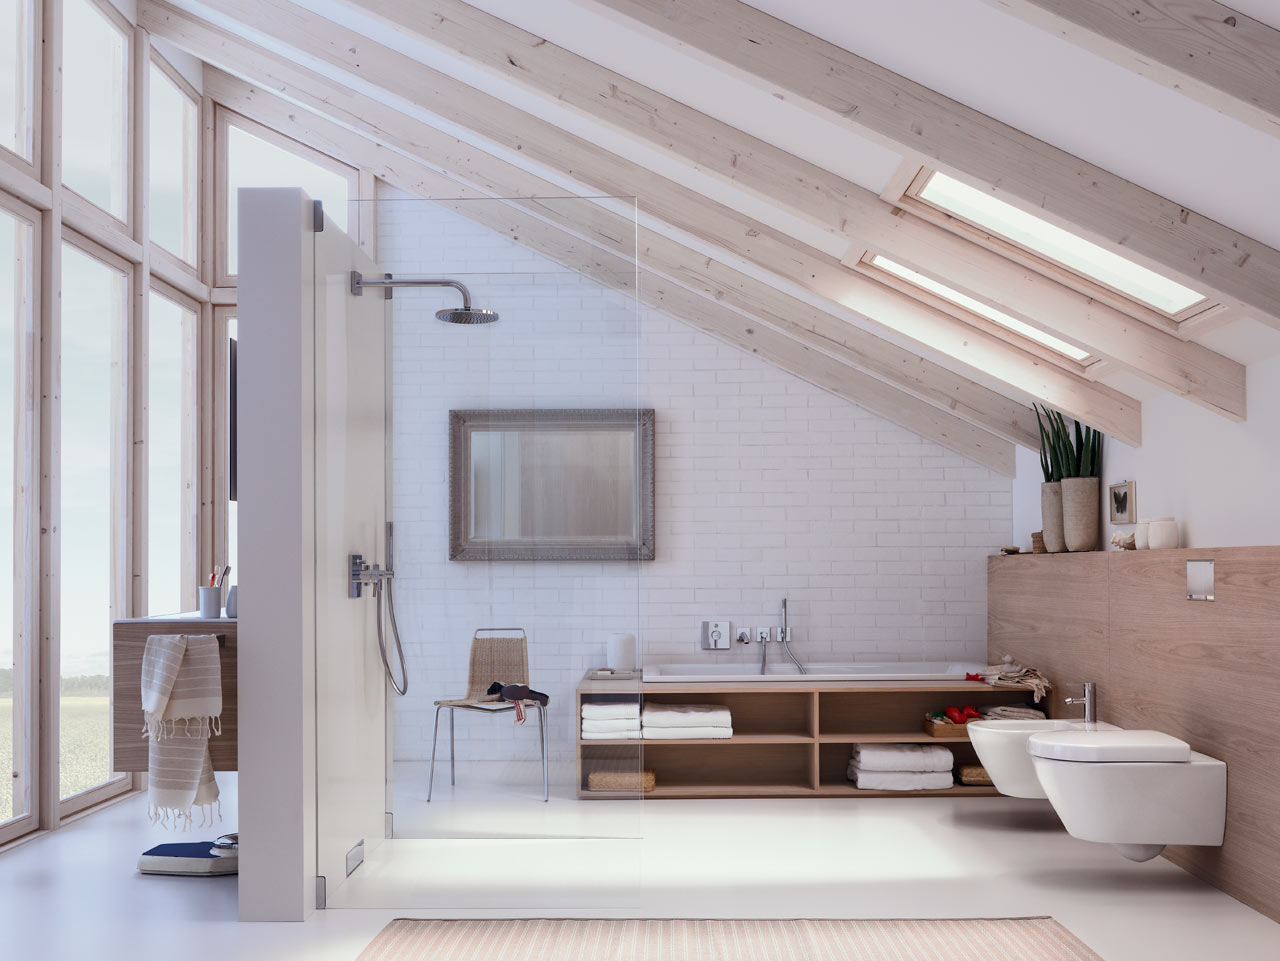 Hot Kitchen and Bathroom Trends for 2016